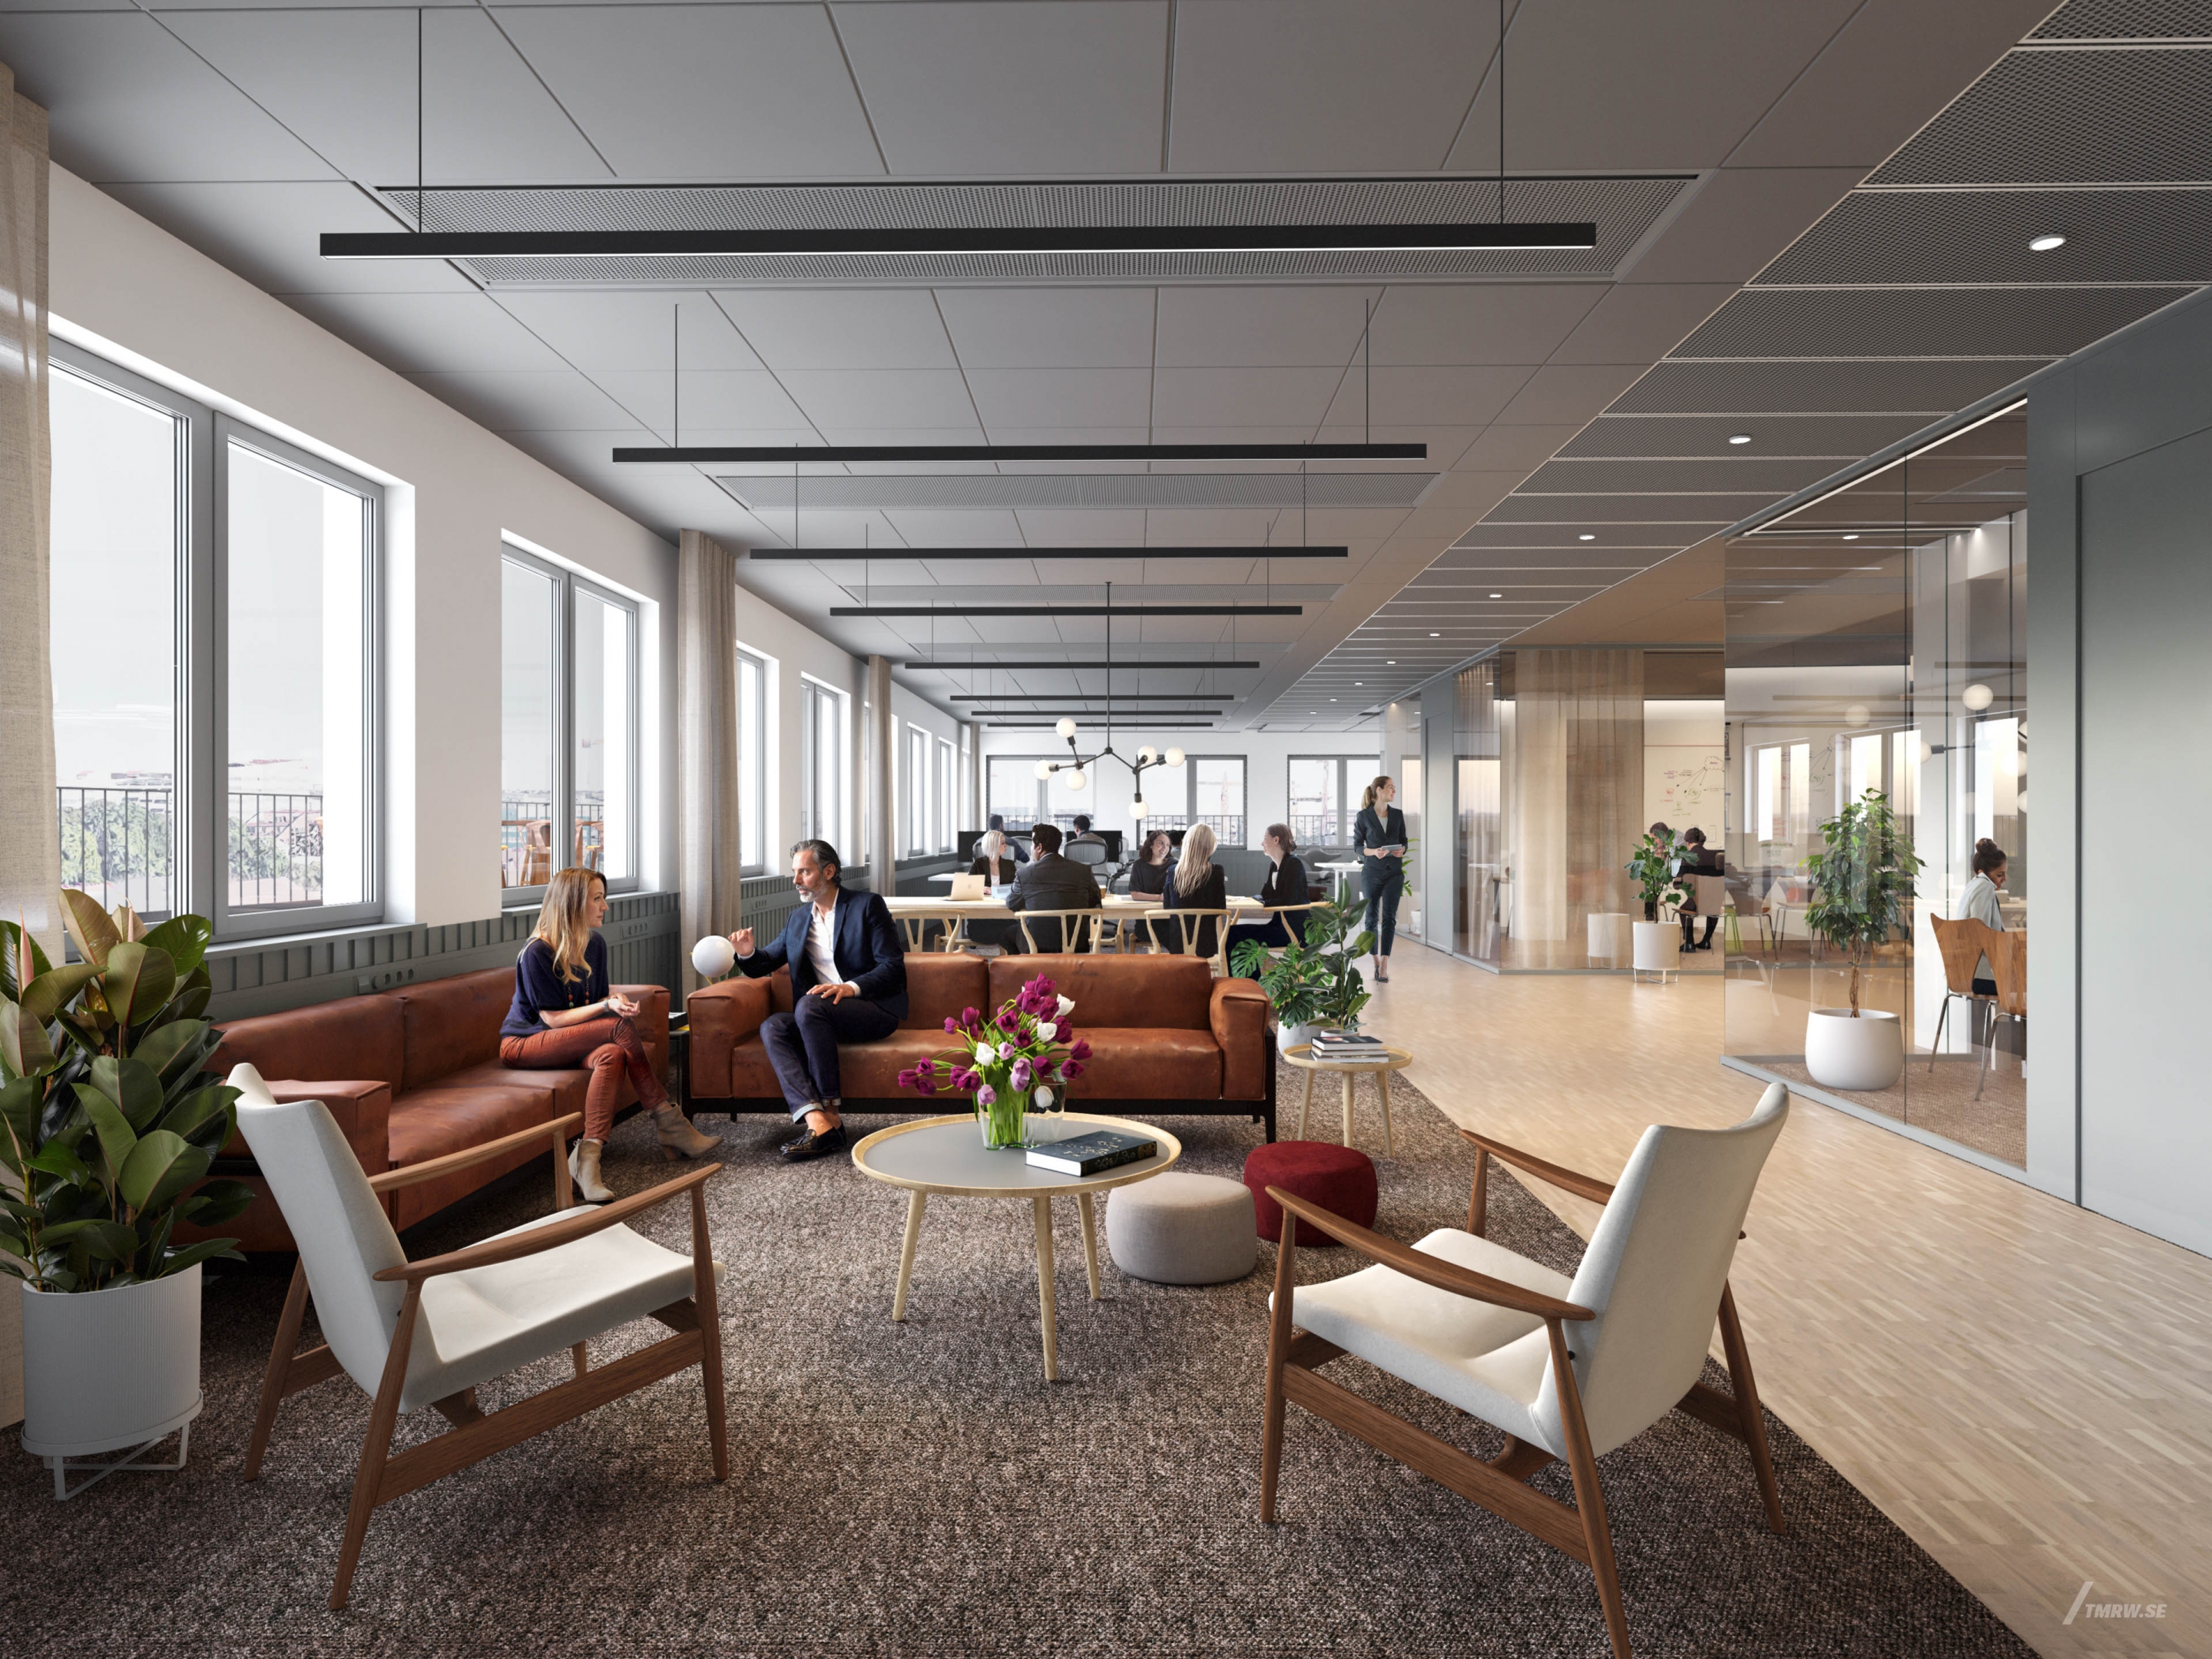 Architectural visualization of Nöten for Fabege, an office building day light from an interior view.